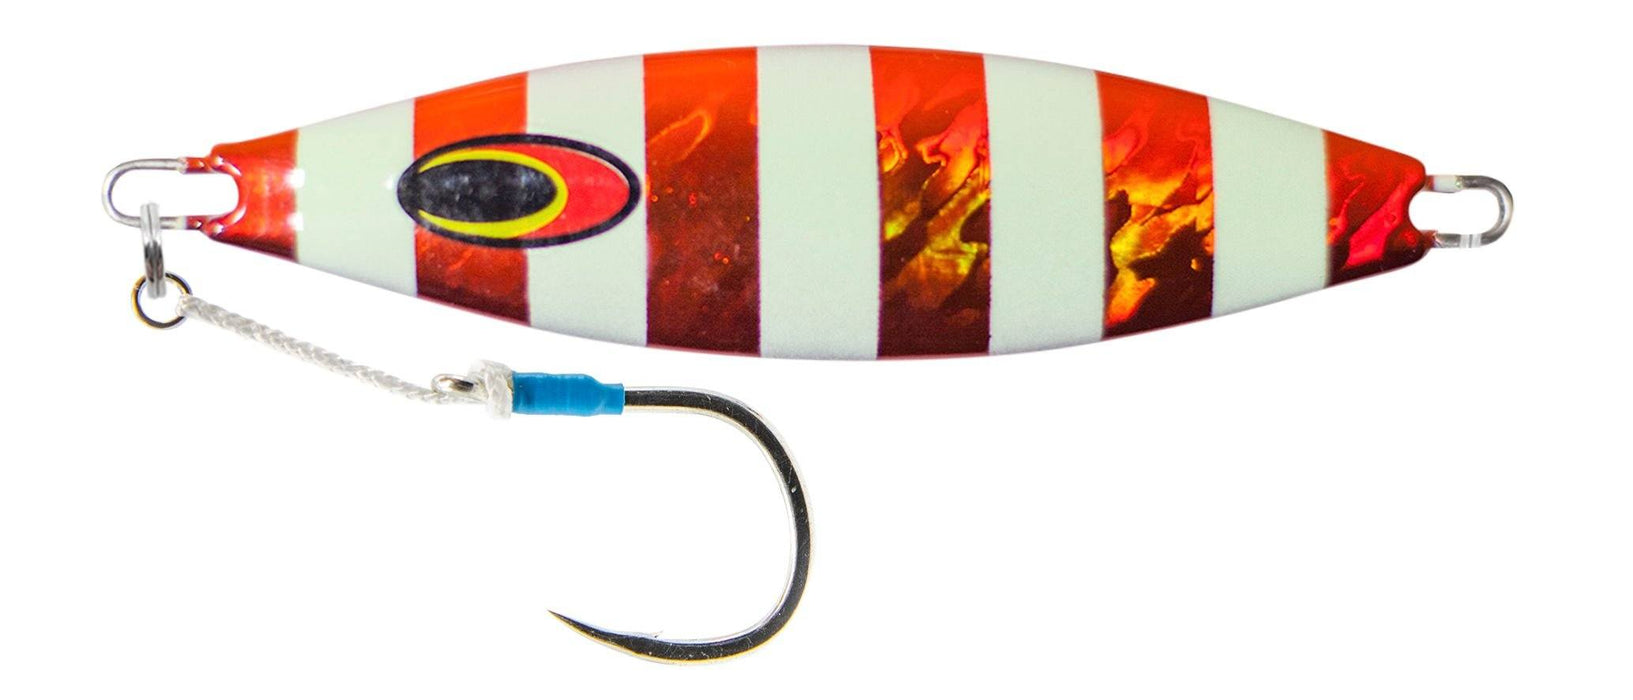 Nomad The Buffalo Jig Lures